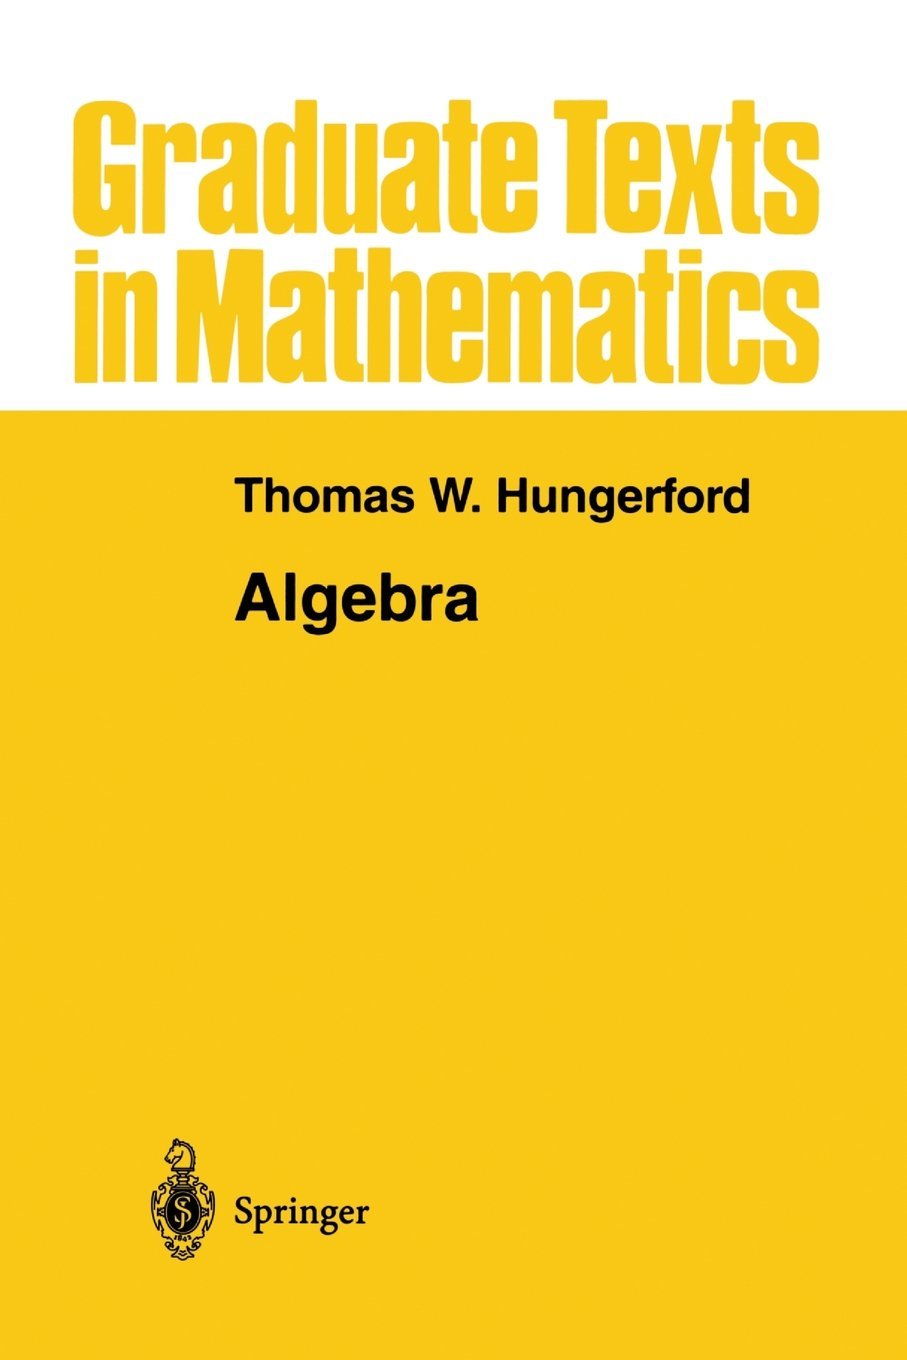 dummit and foote abstract algebra 2nd edition pdf download